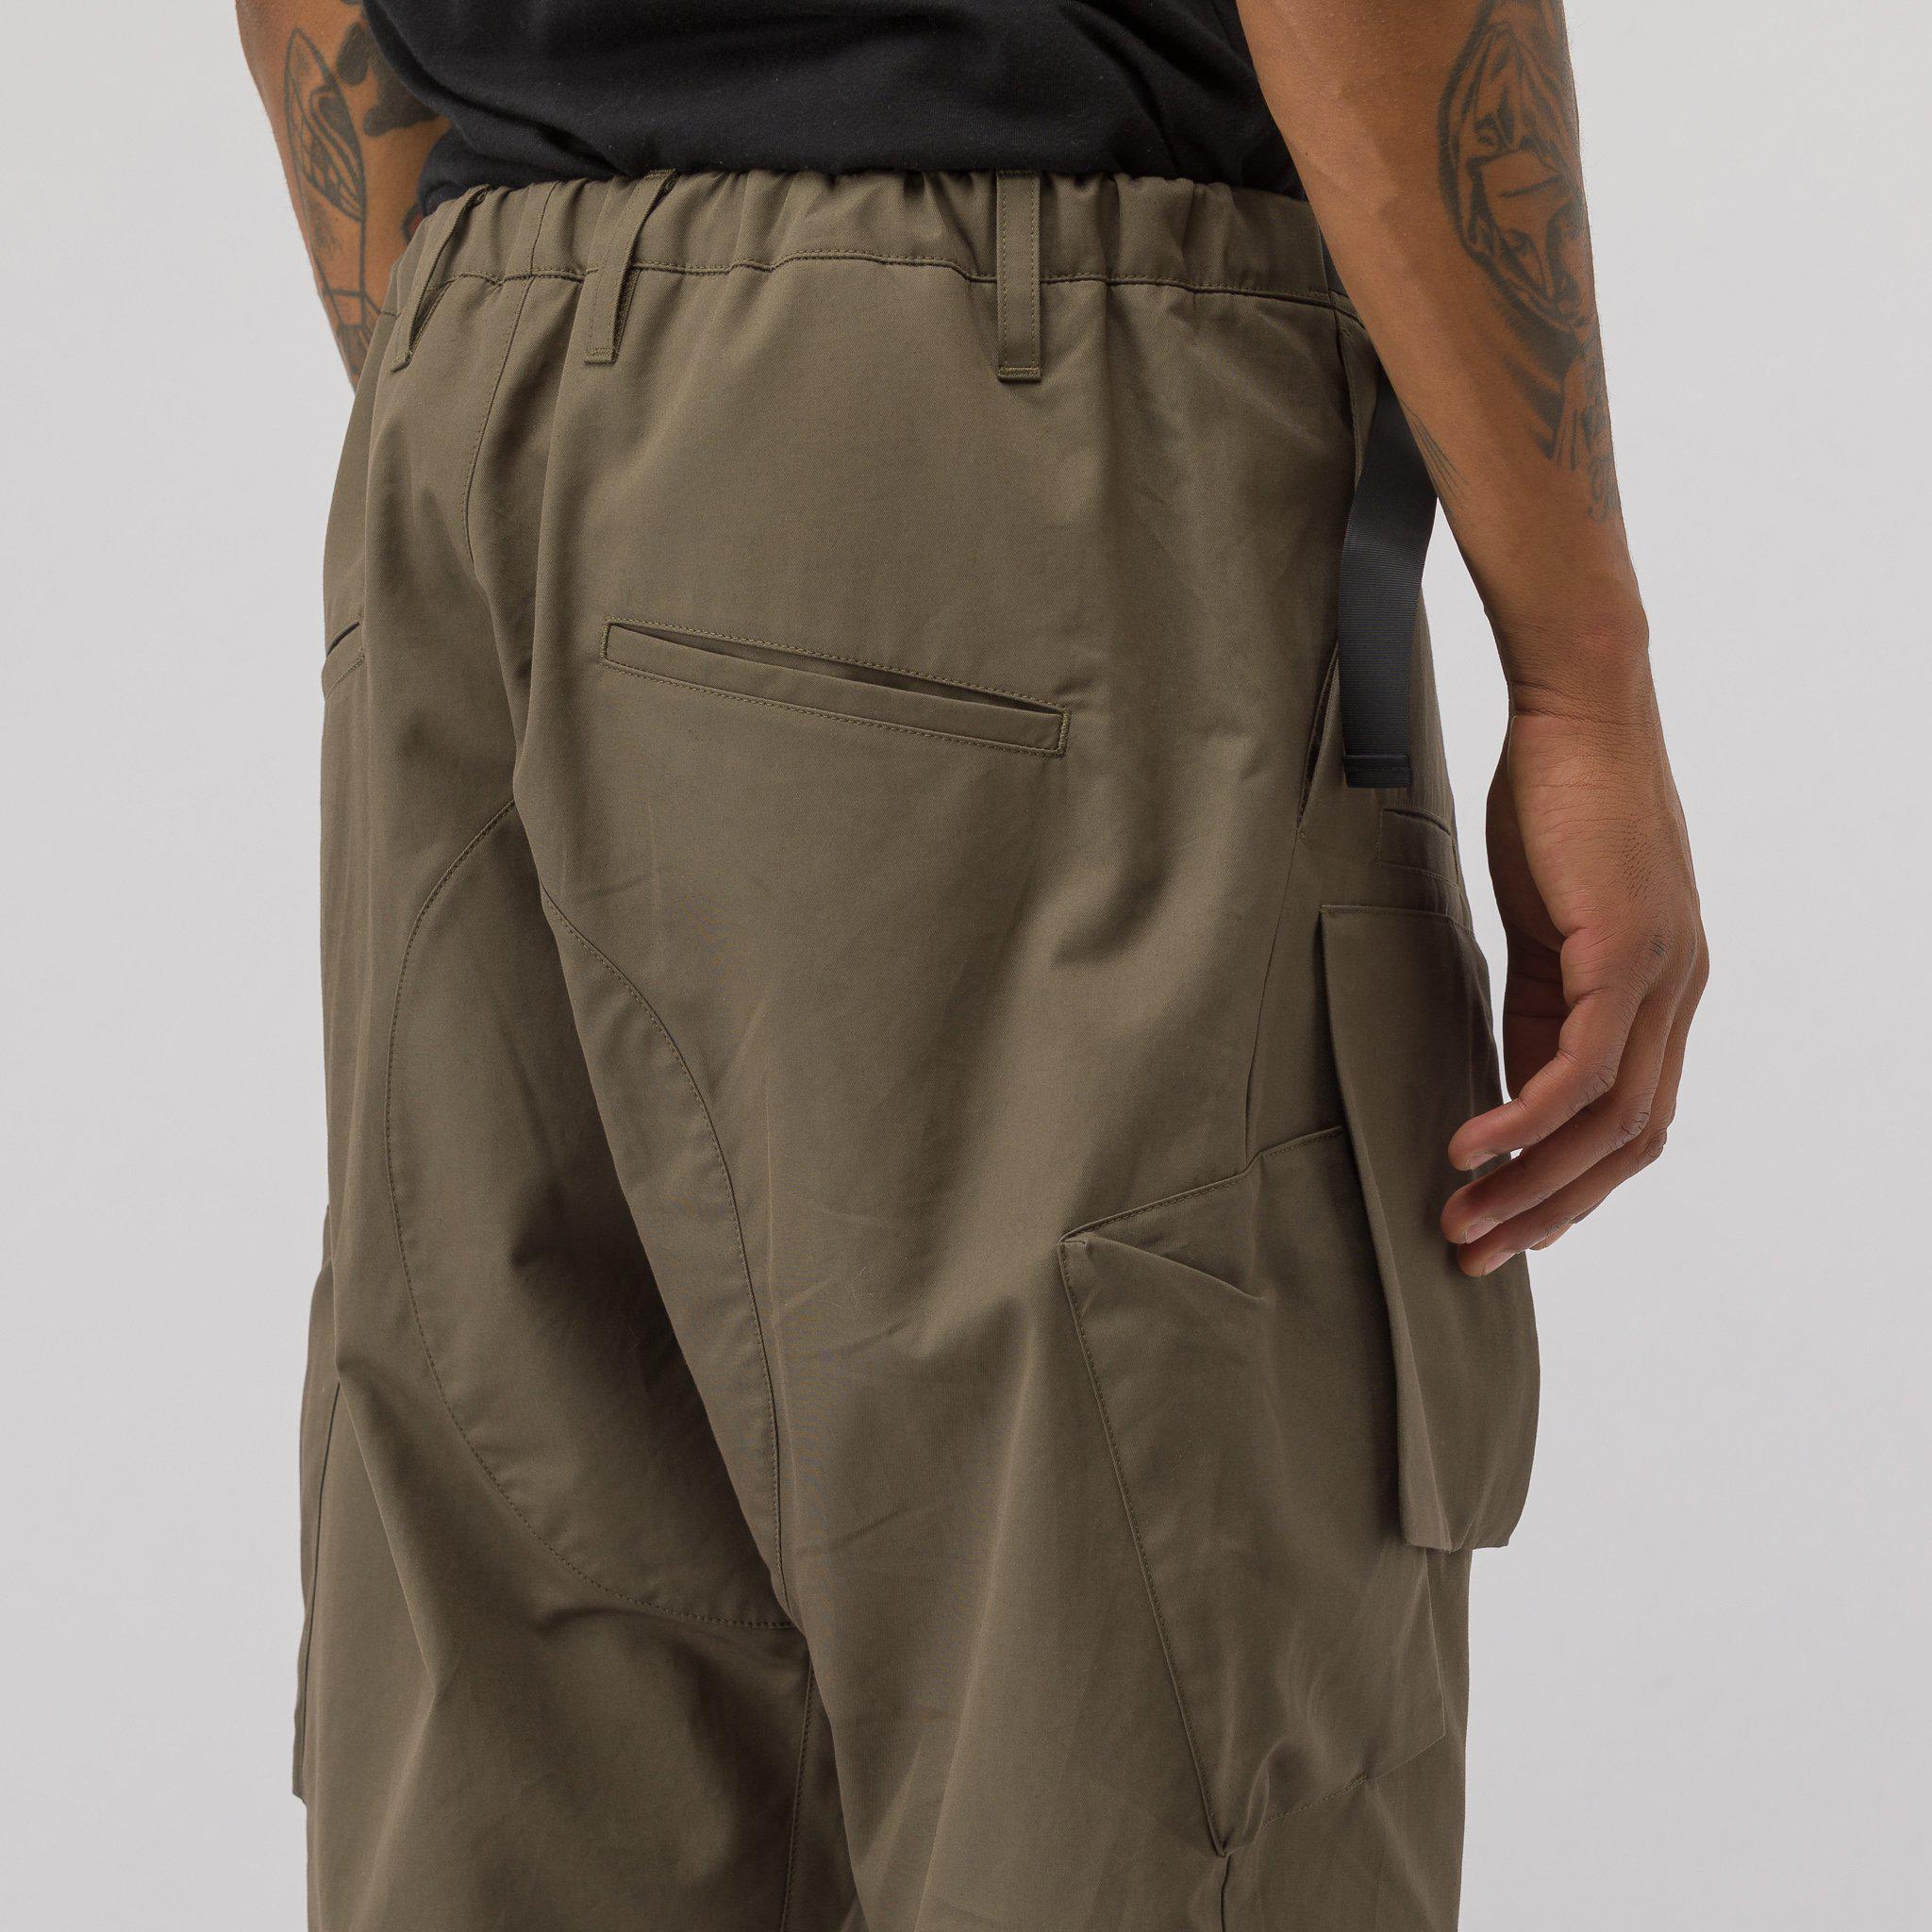 Acronym P23a S Hd Cotton Cargo Drawcord Trouser In Raf Green For Men Lyst